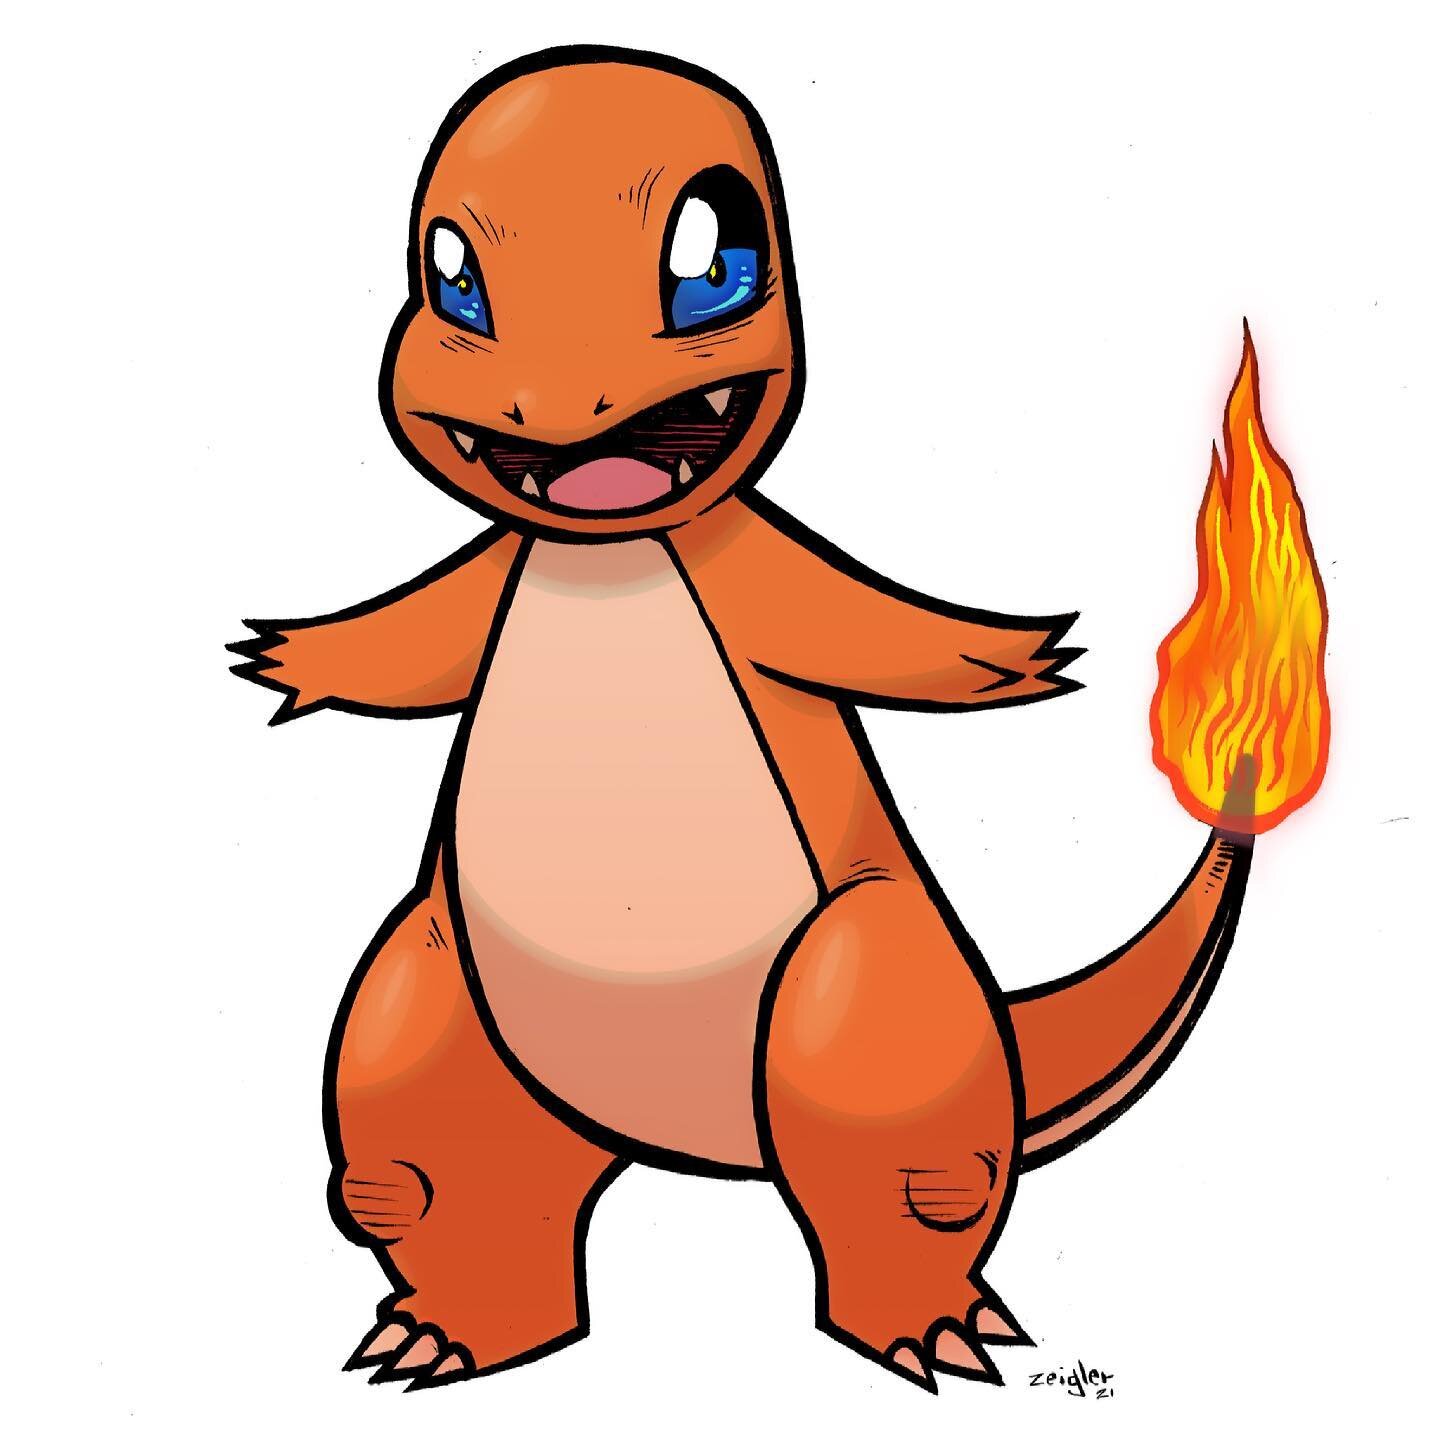 It&rsquo;s Charmander!

Now that I got the original starting Pok&eacute;mon complete, let me know in the comments if you want more Pok&eacute;mon! Who knows I could have a whole Pok&eacute;dex soon.
.
.
.

⁣
.⁣
.⁣
.⁣
.⁣
.⁣
#pikachu #pok&eacute;mon #p